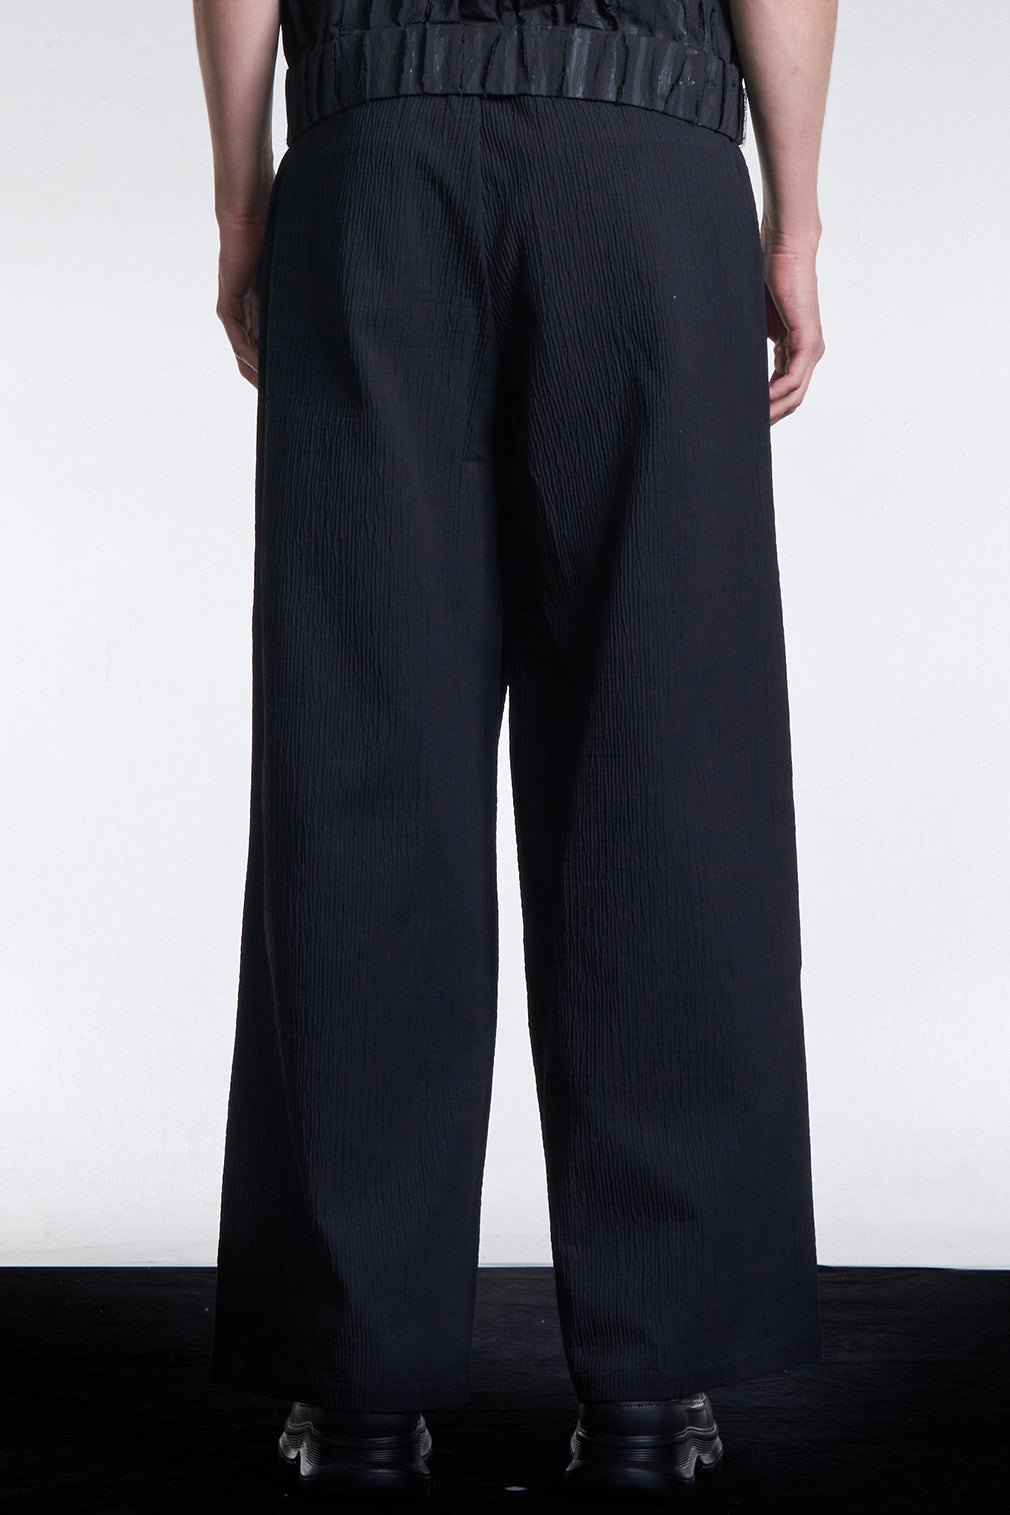 Striped Textured Wide Fit Pants